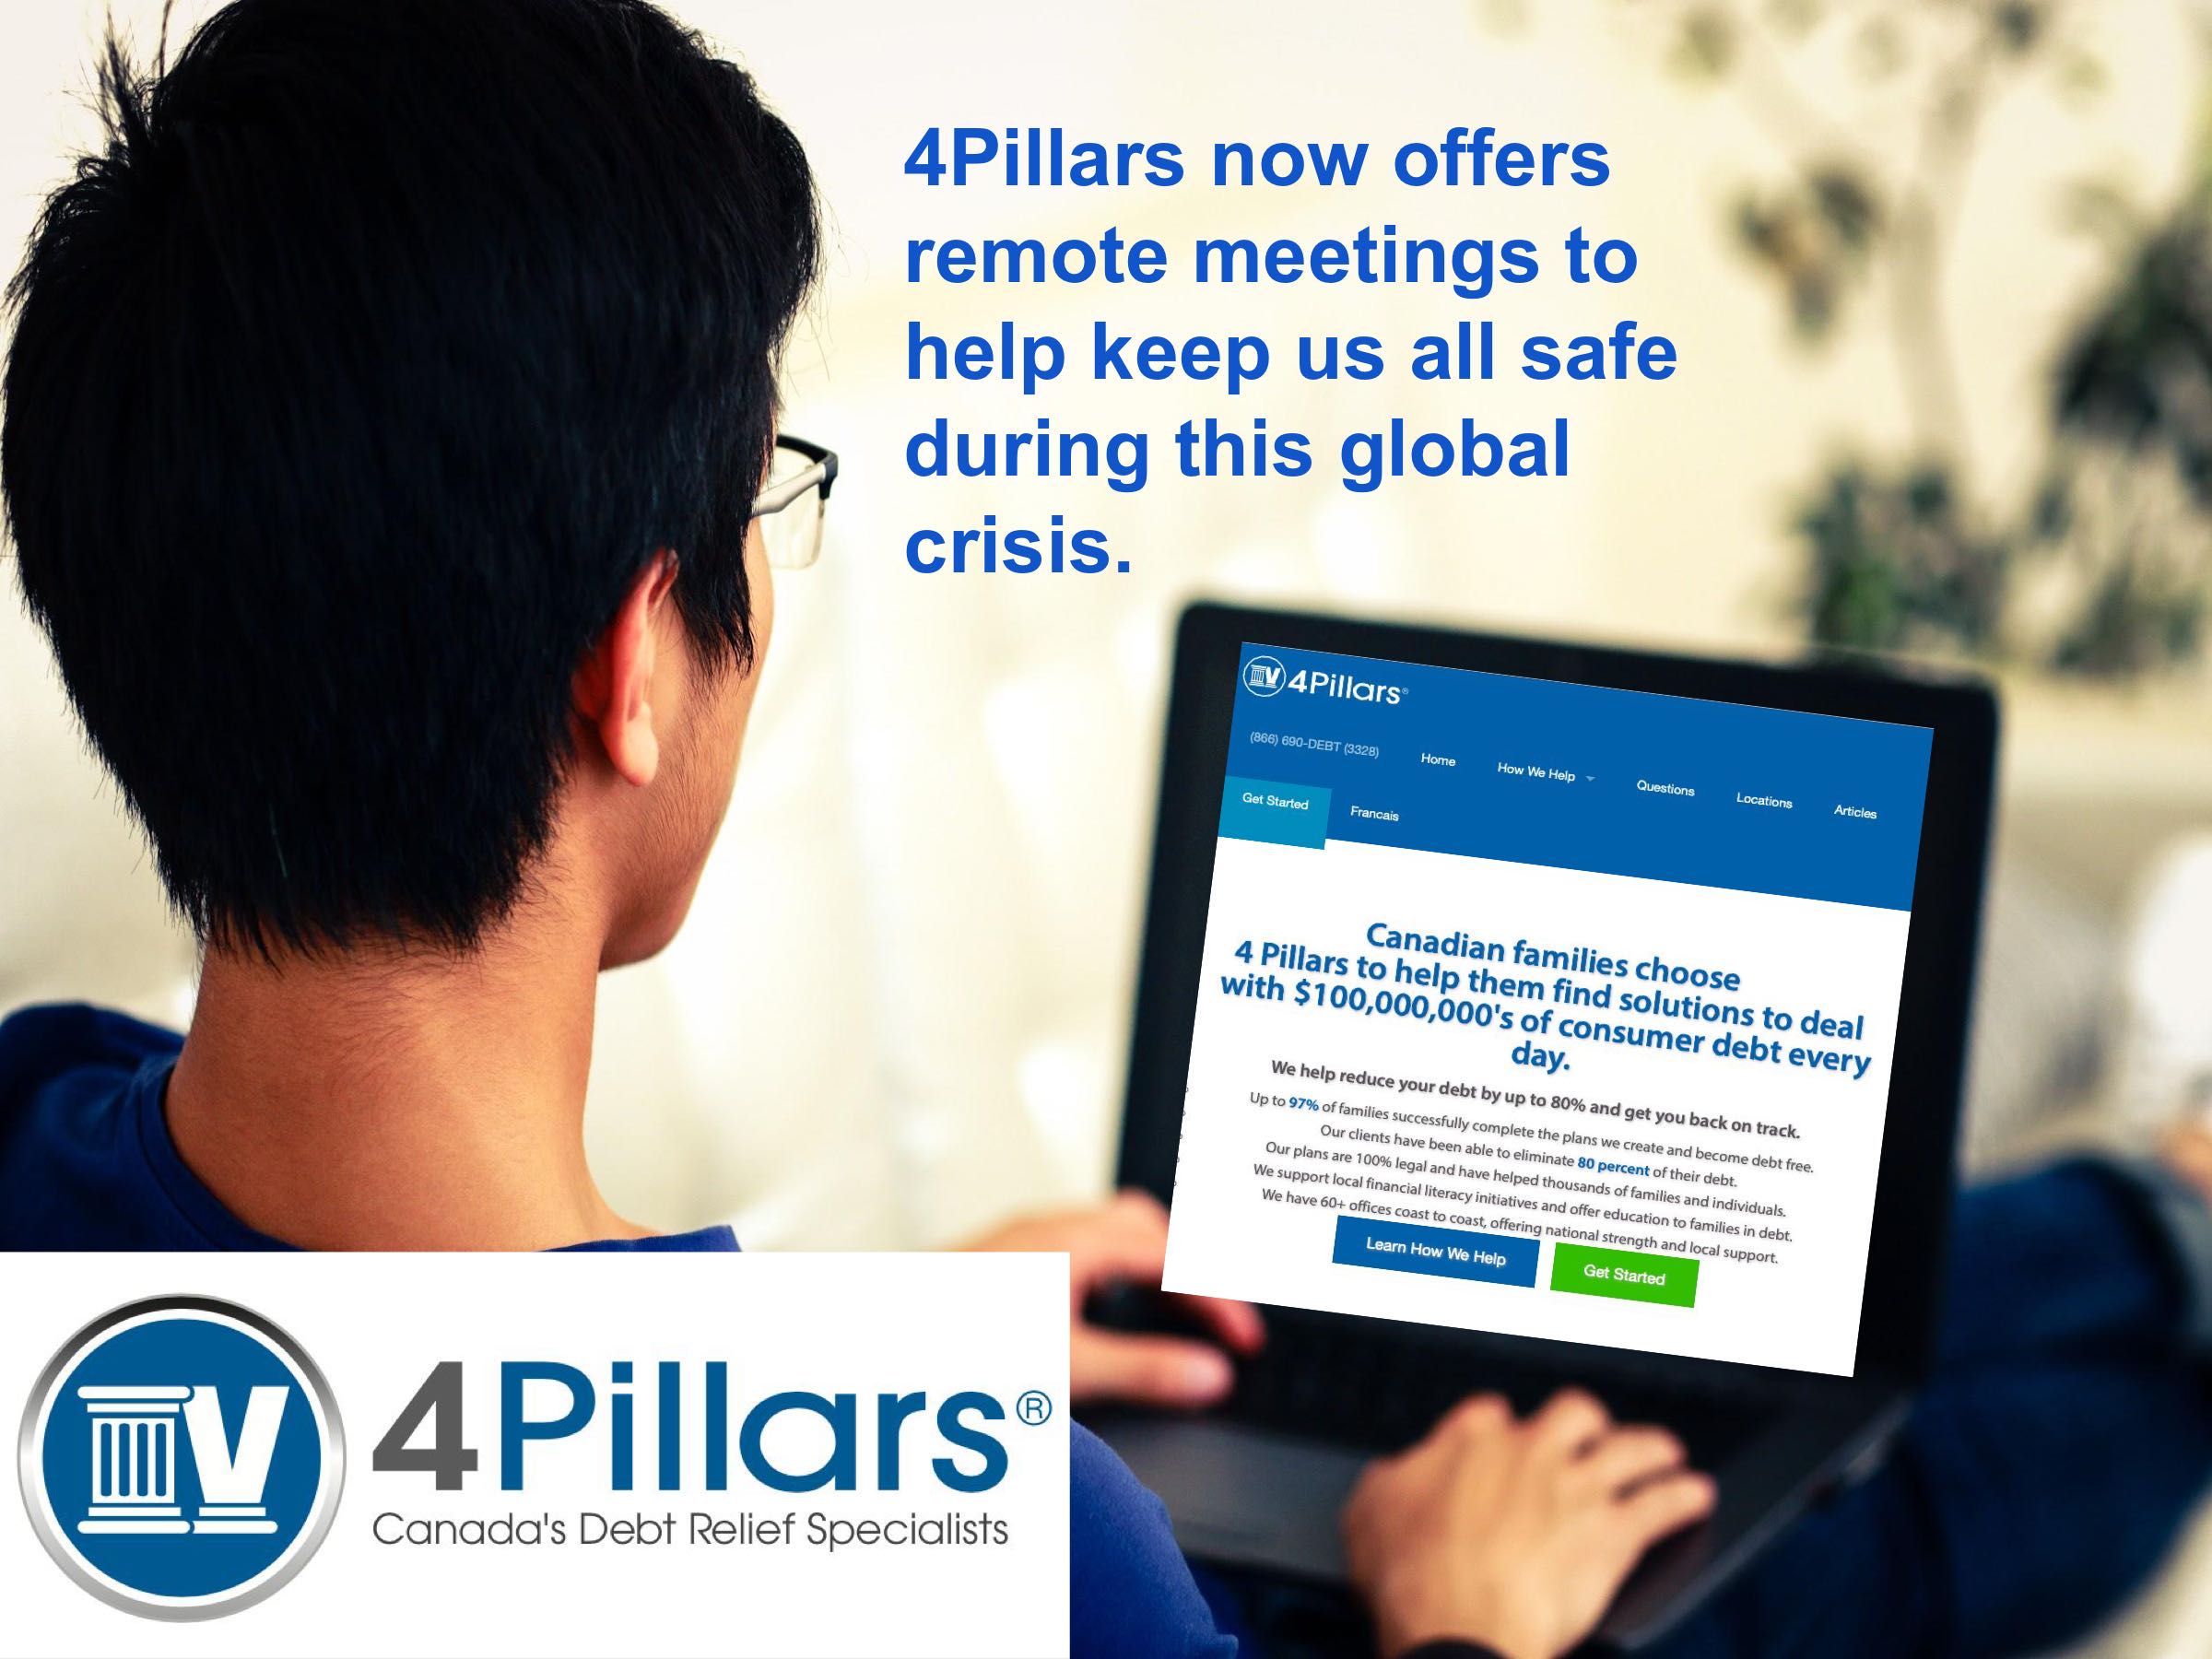 The 4 Pillars Team is open for business